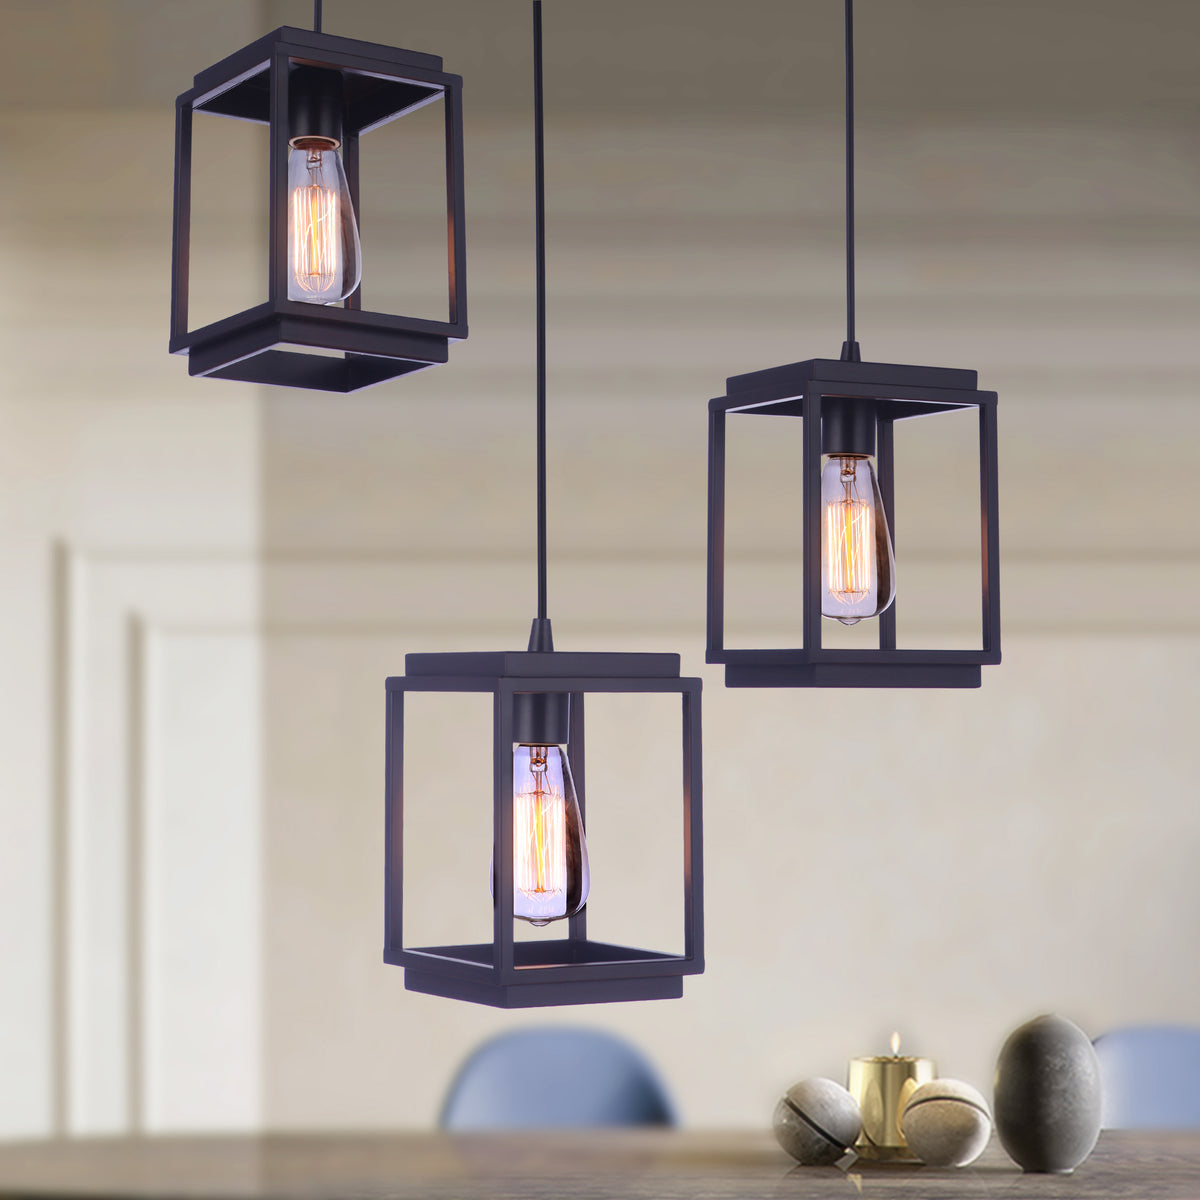 Worth Home Products - Brushed Bronze Minimalist Farmhouse Cage Instant Pendant Light - Can light to pendant light Conversion kit for kitchen island, breakfast nook, dinig room, living room and home office. - PBN-2377-90BB